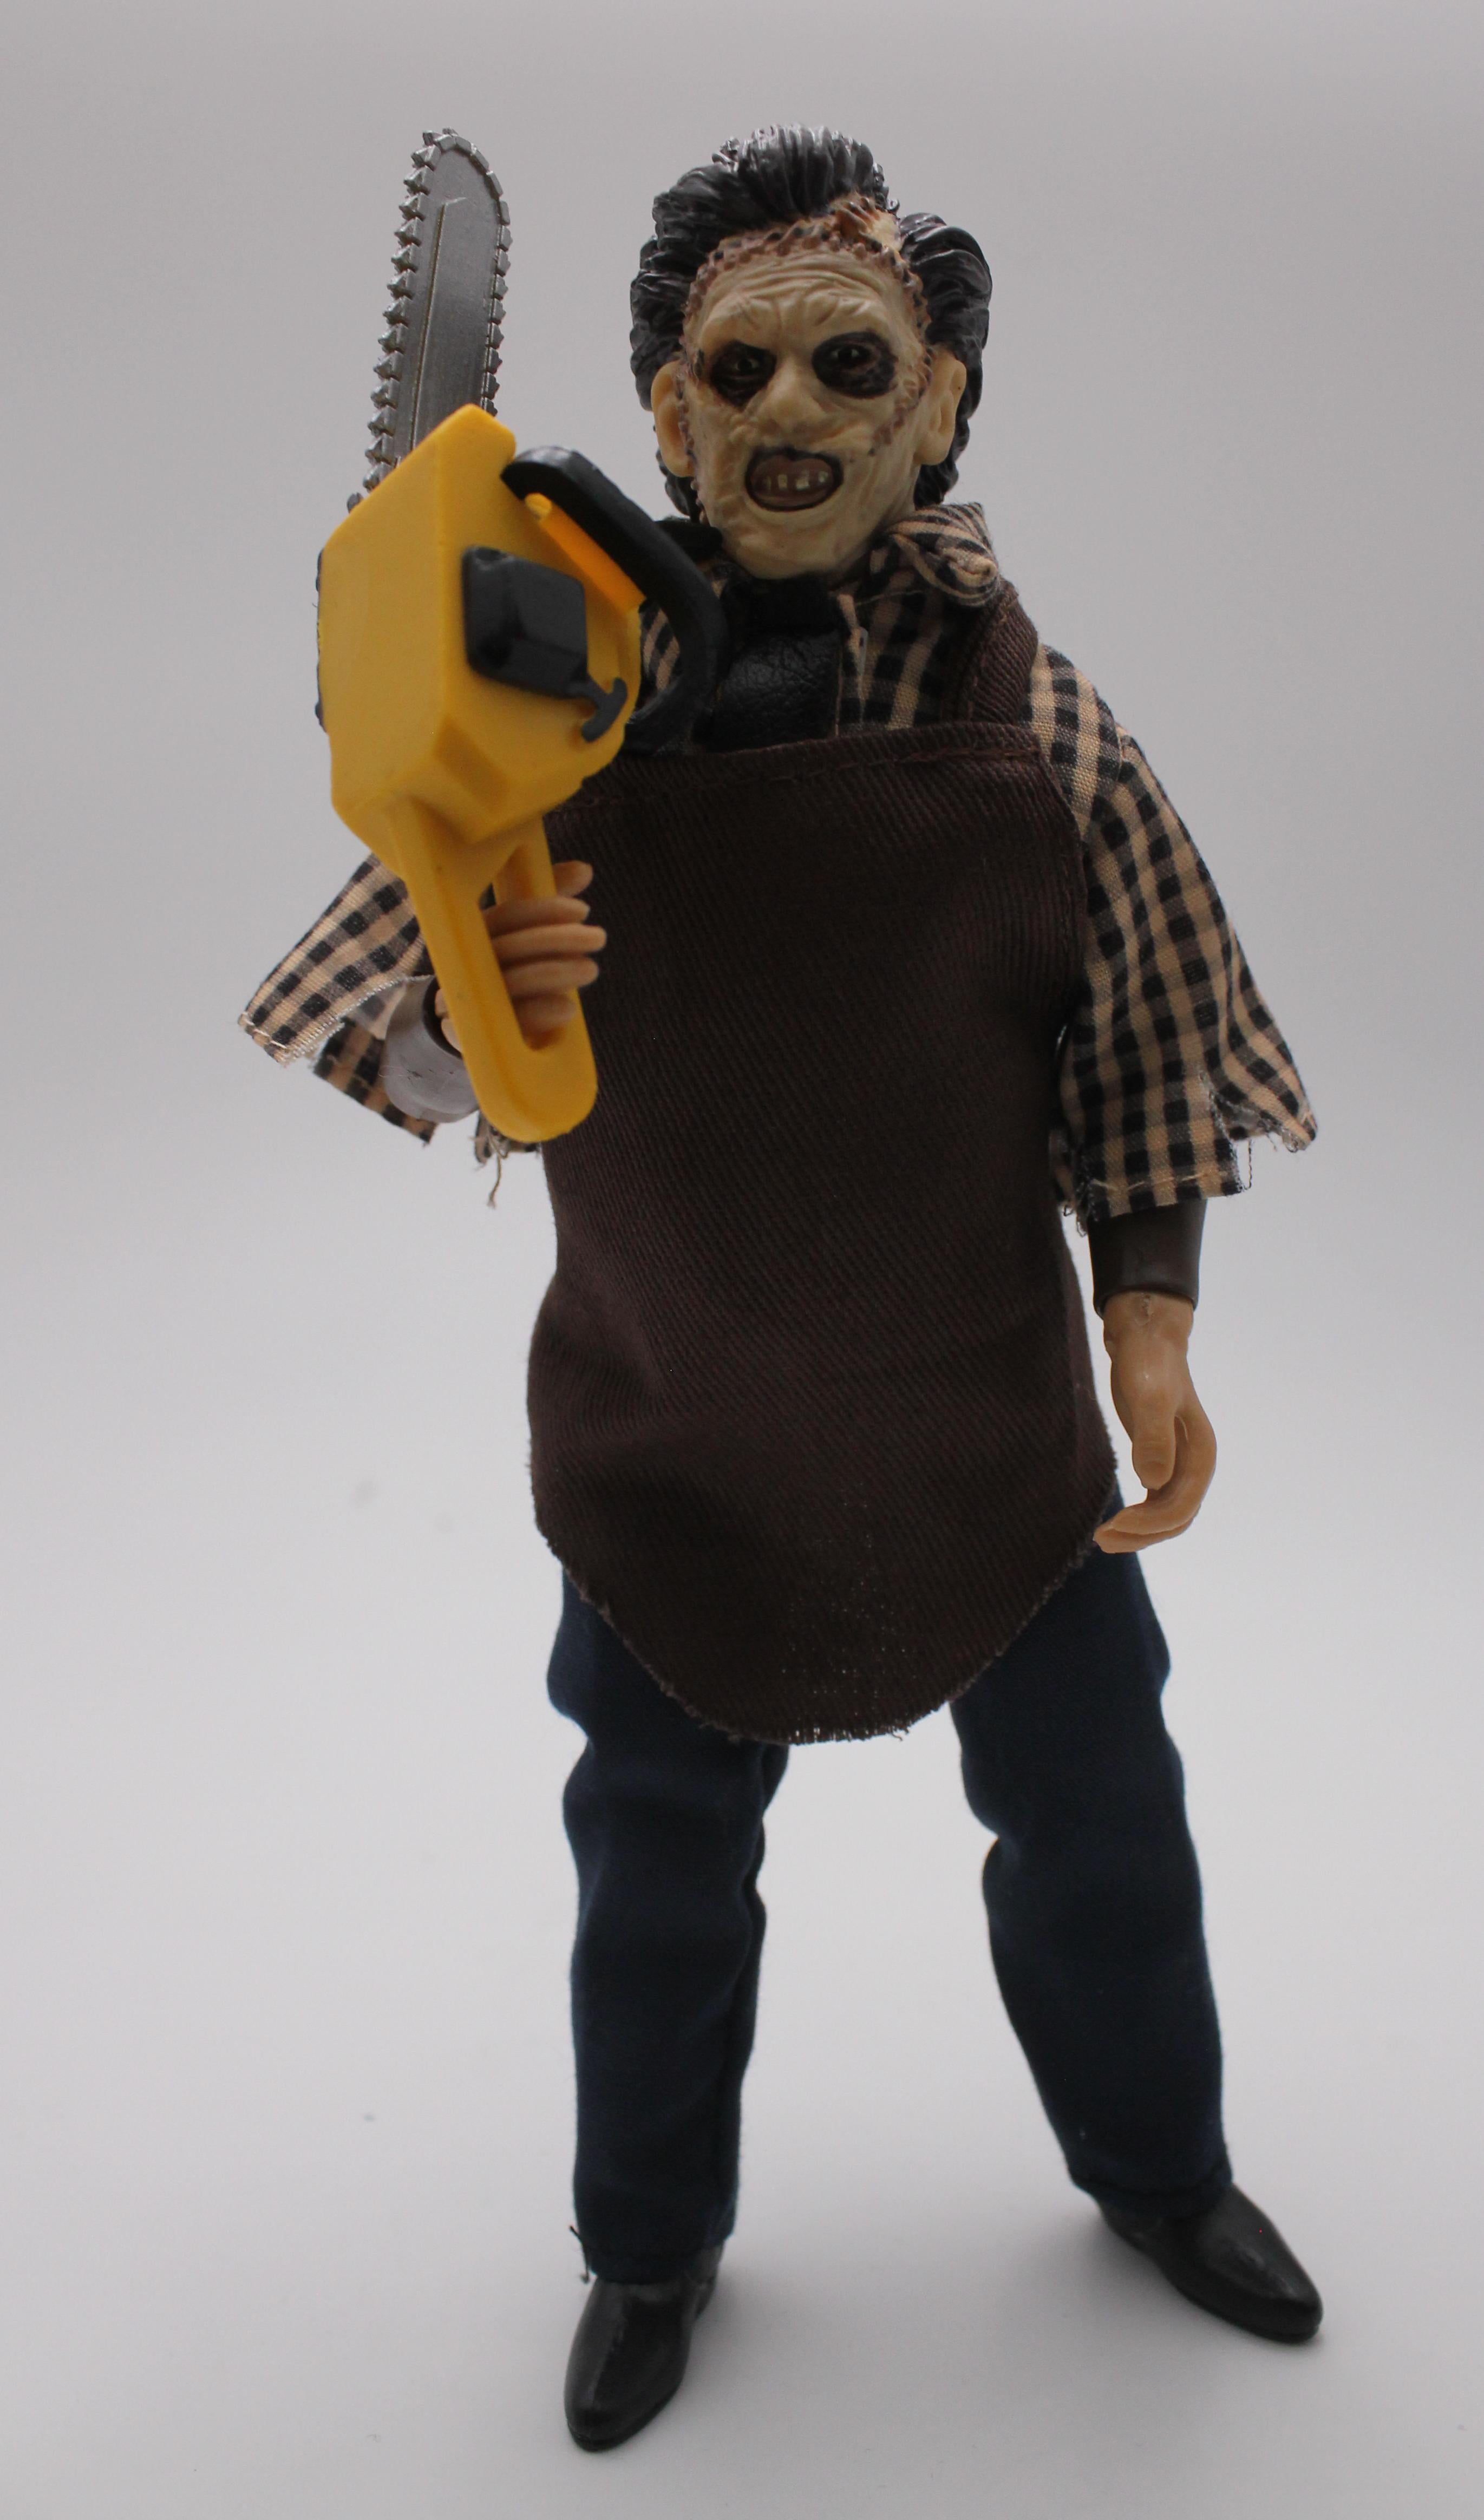 Texas Chainsaw Massacre Leatherface Mego 8 Inch Action Figure Horror Series G2 for sale online